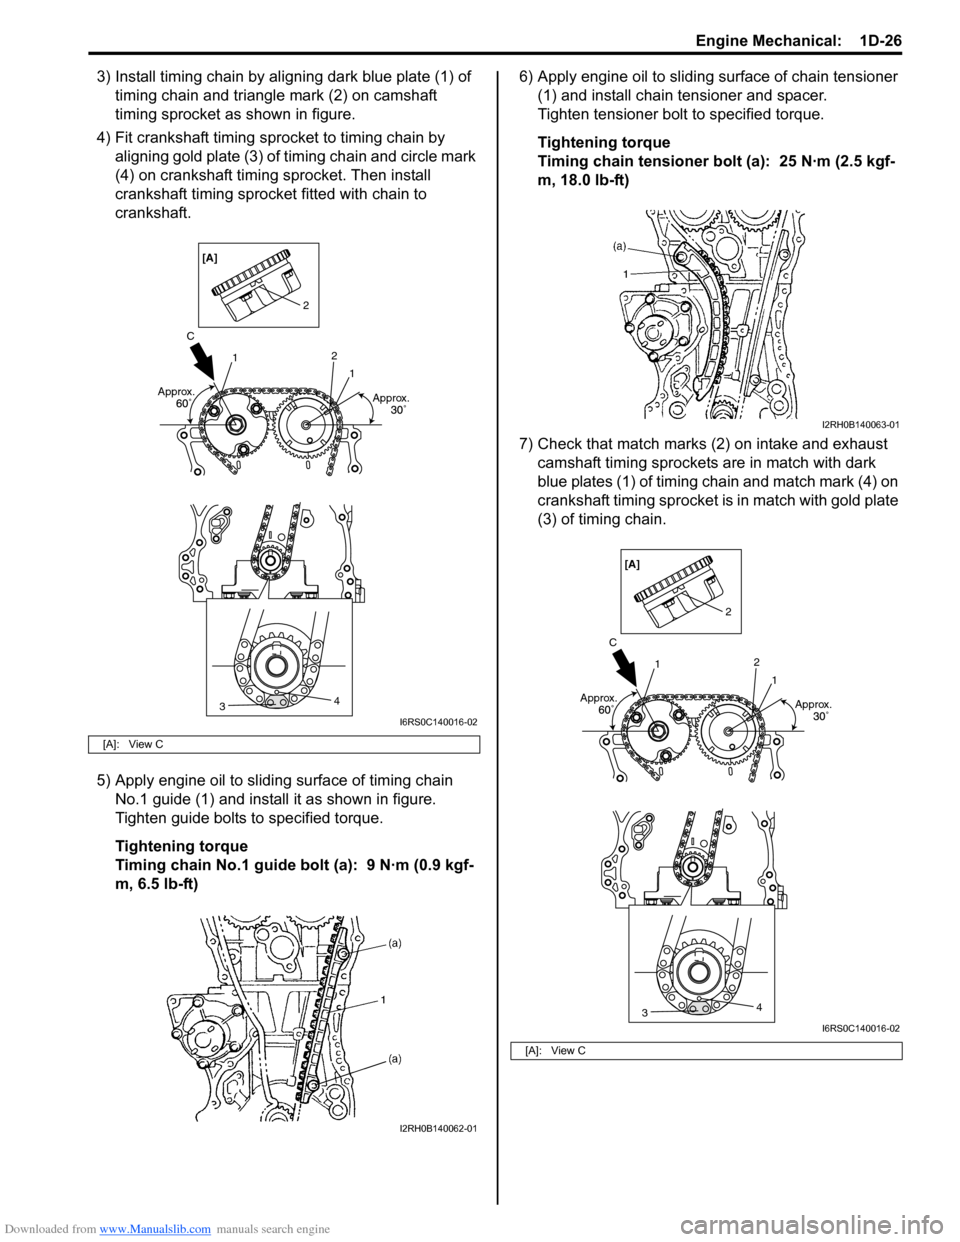 SUZUKI SWIFT 2007 2.G Service Workshop Manual Downloaded from www.Manualslib.com manuals search engine Engine Mechanical:  1D-26
3) Install timing chain by aligning dark blue plate (1) of timing chain and triangle mark (2) on camshaft 
timing spr